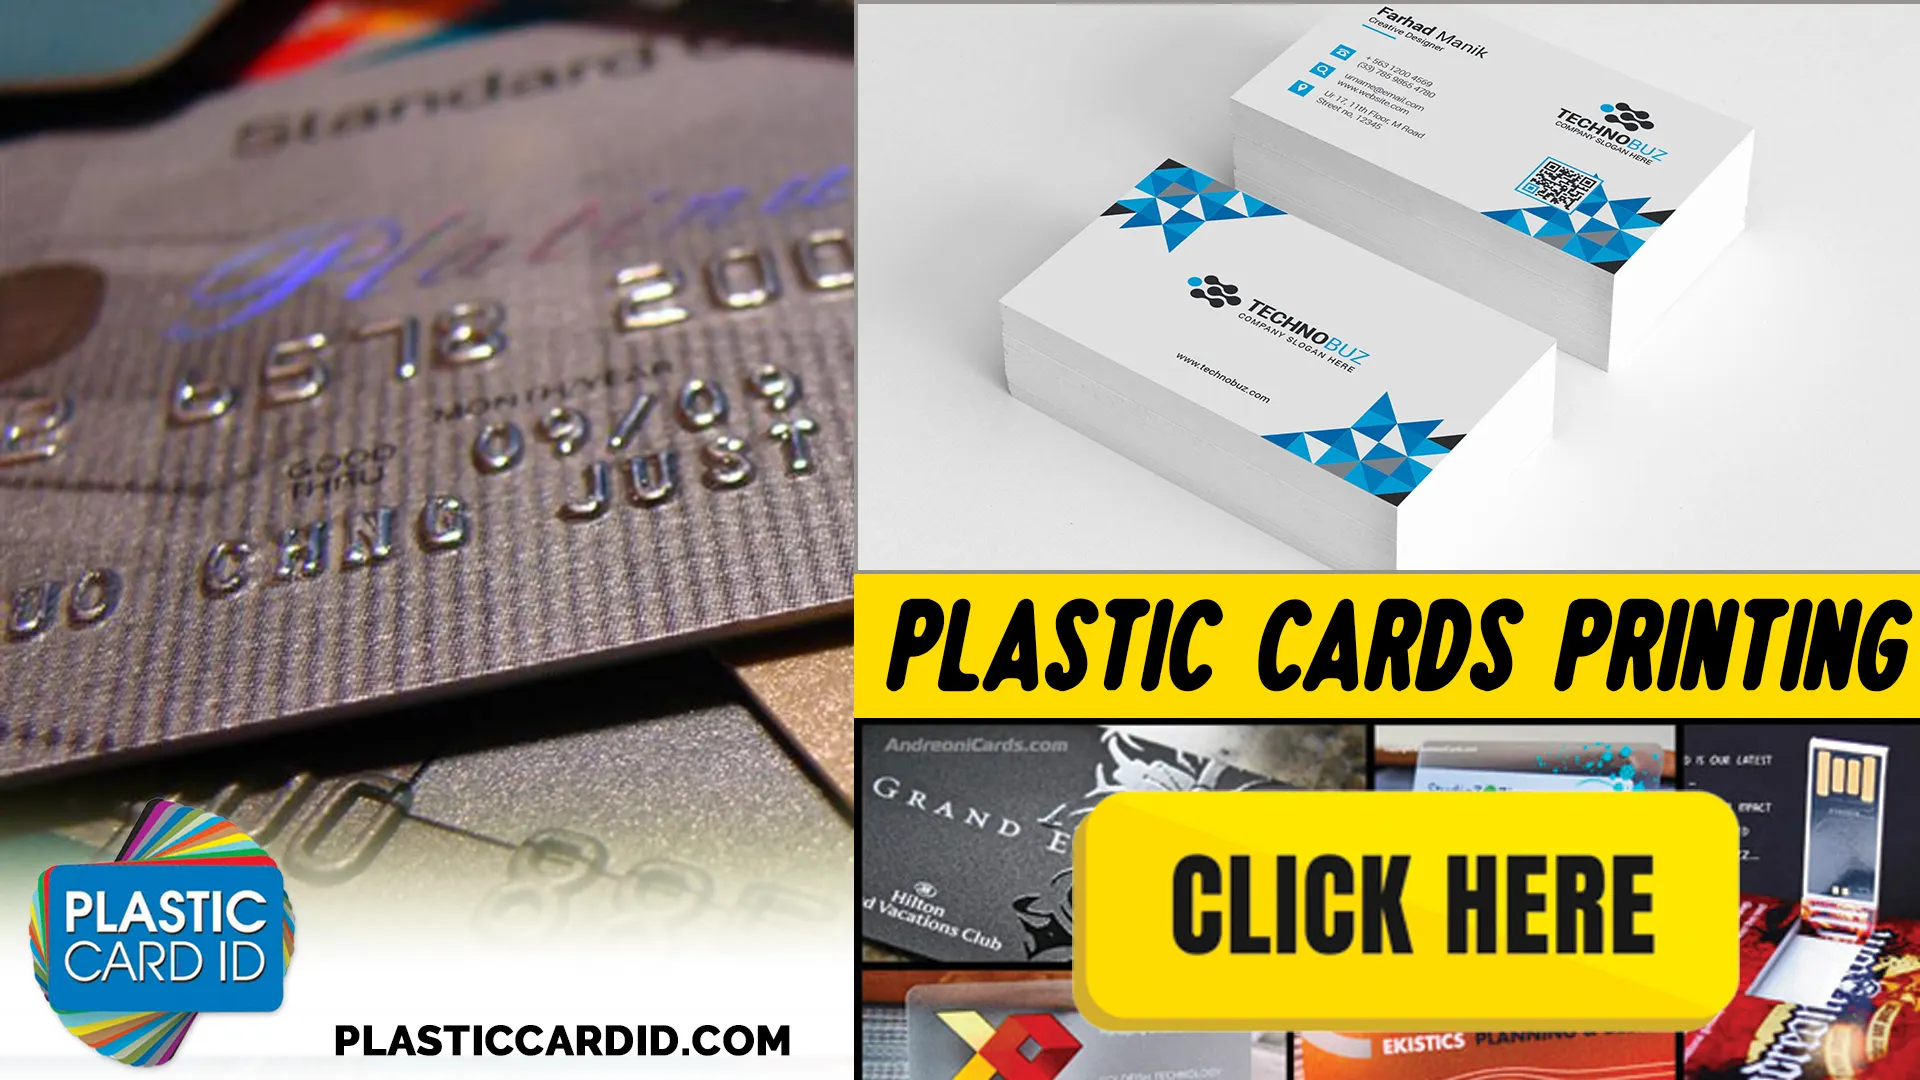 Welcome to the World of Enhanced Event Marketing with Plastic Cards